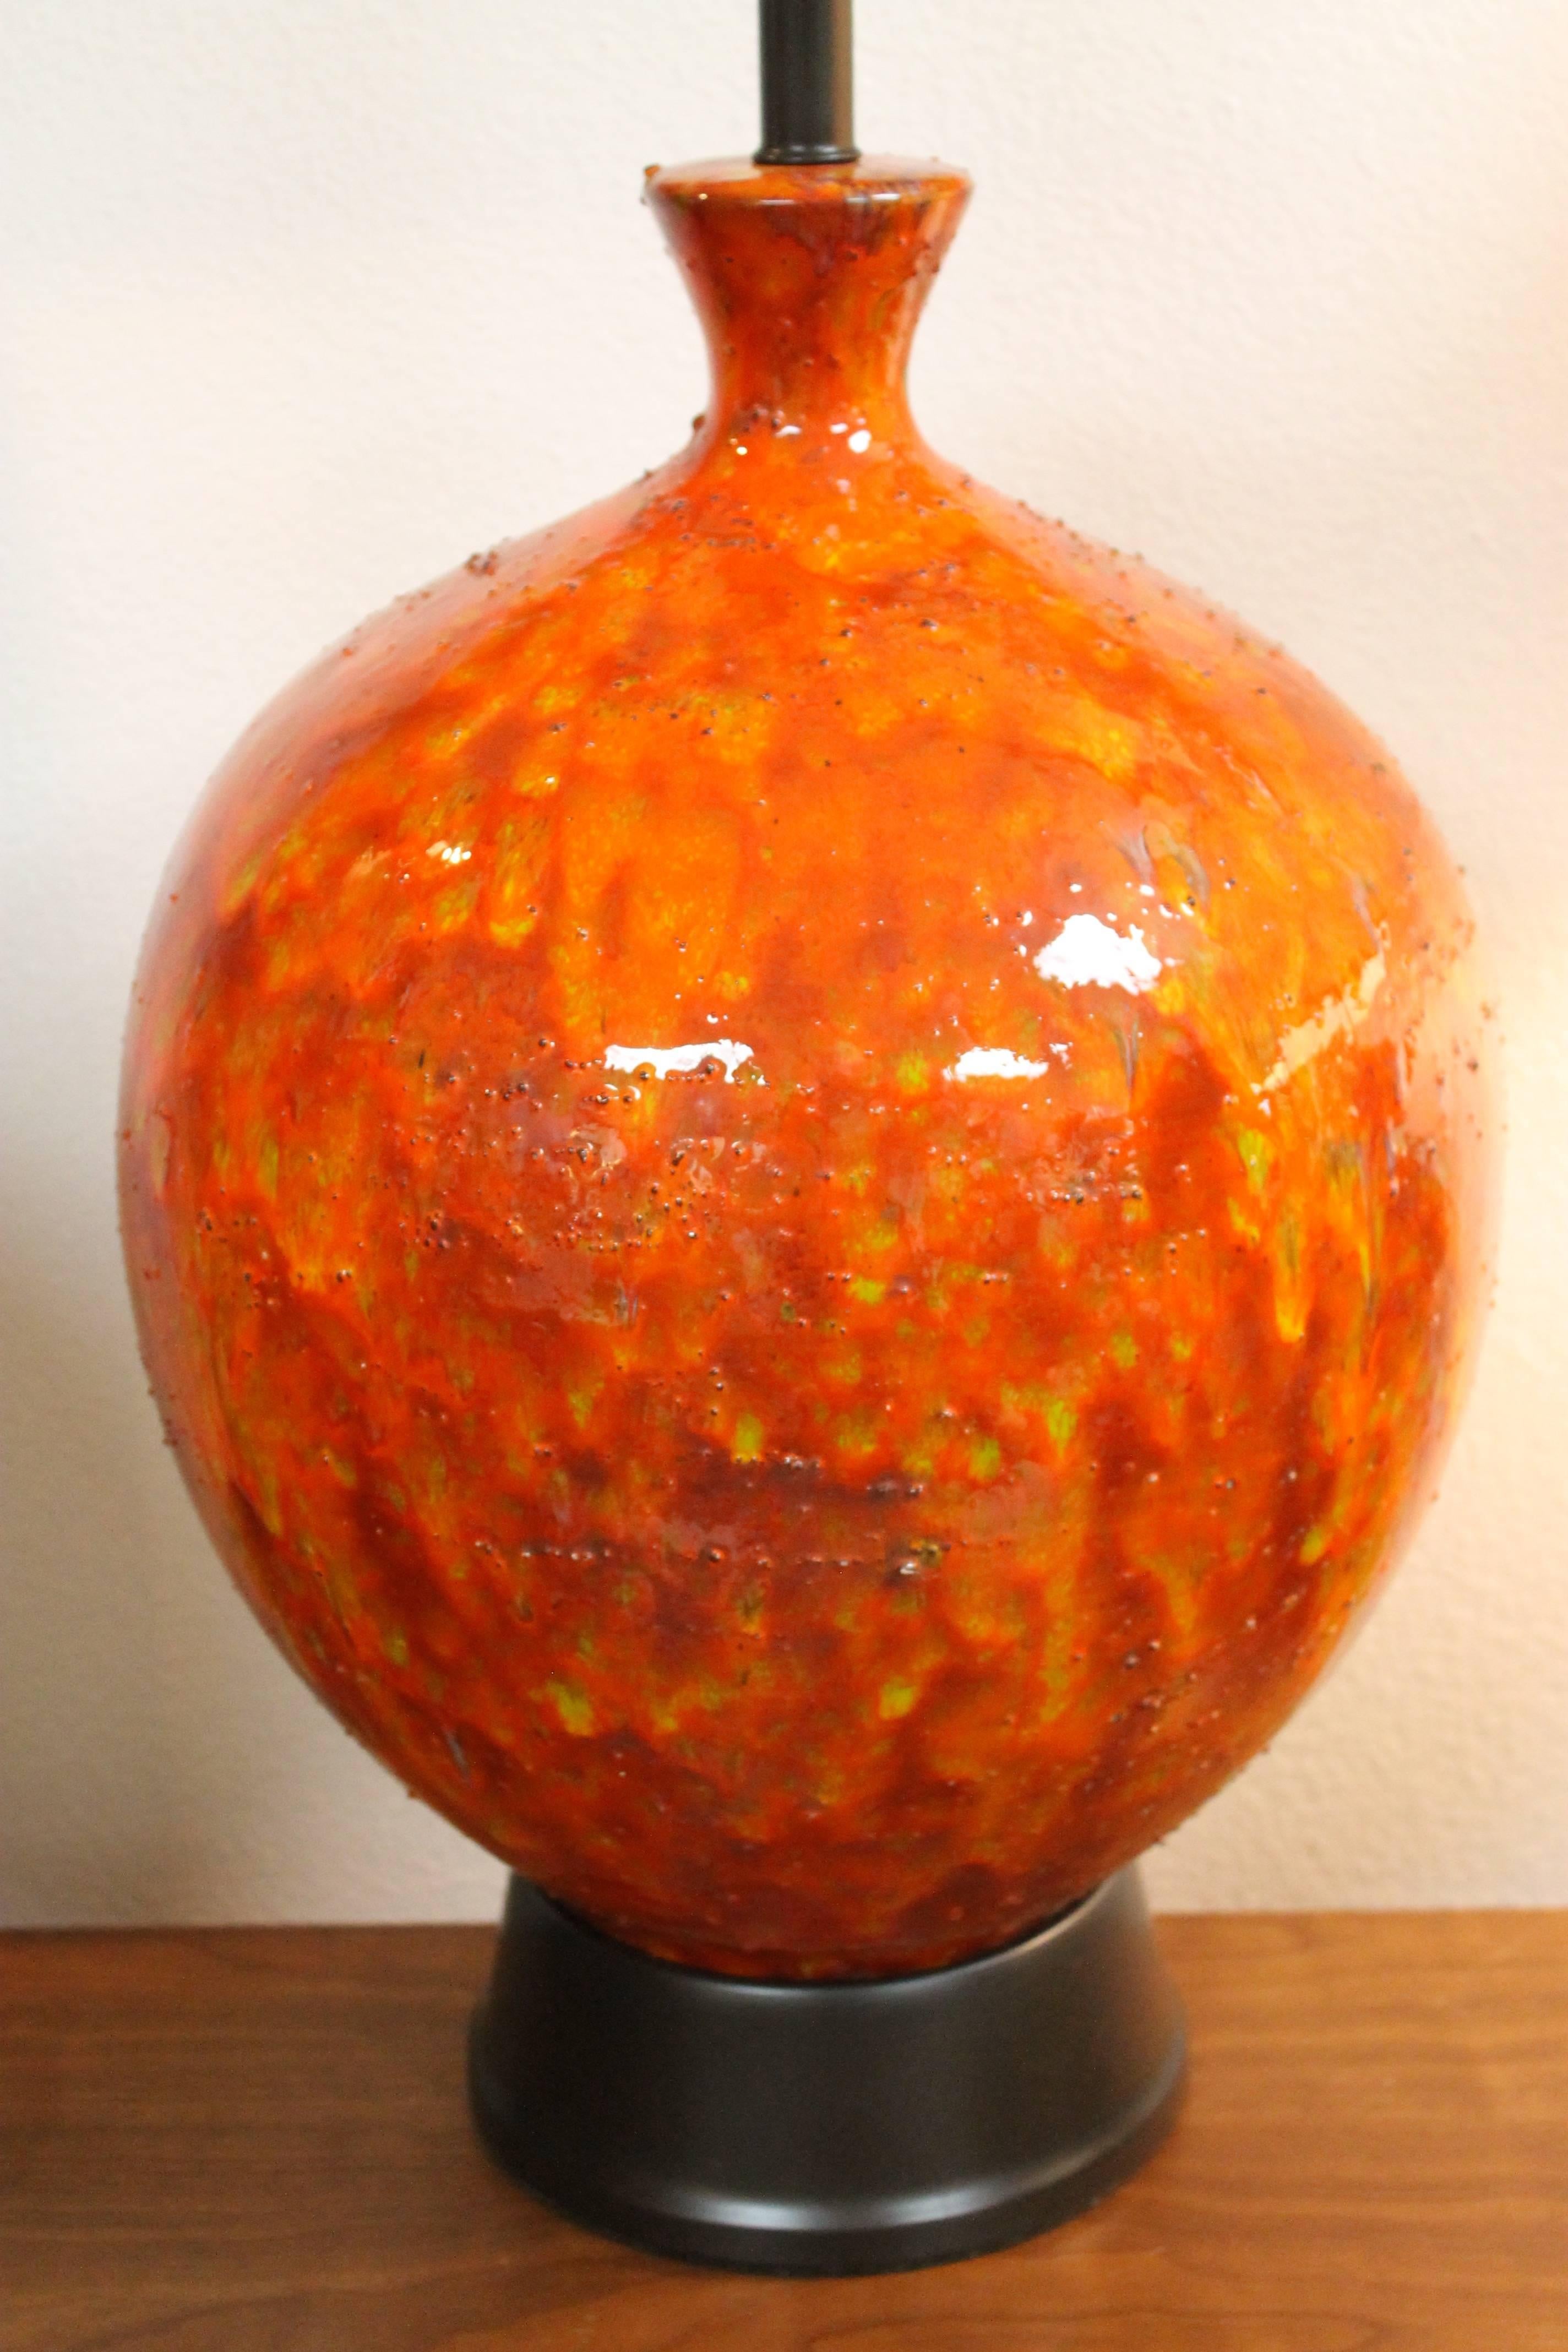 Bulbous pair of ceramic lamps with a mixture of orange, yellow and orange glazes and bubble bursts. These lamps have been professionally rewired. Total height is 23